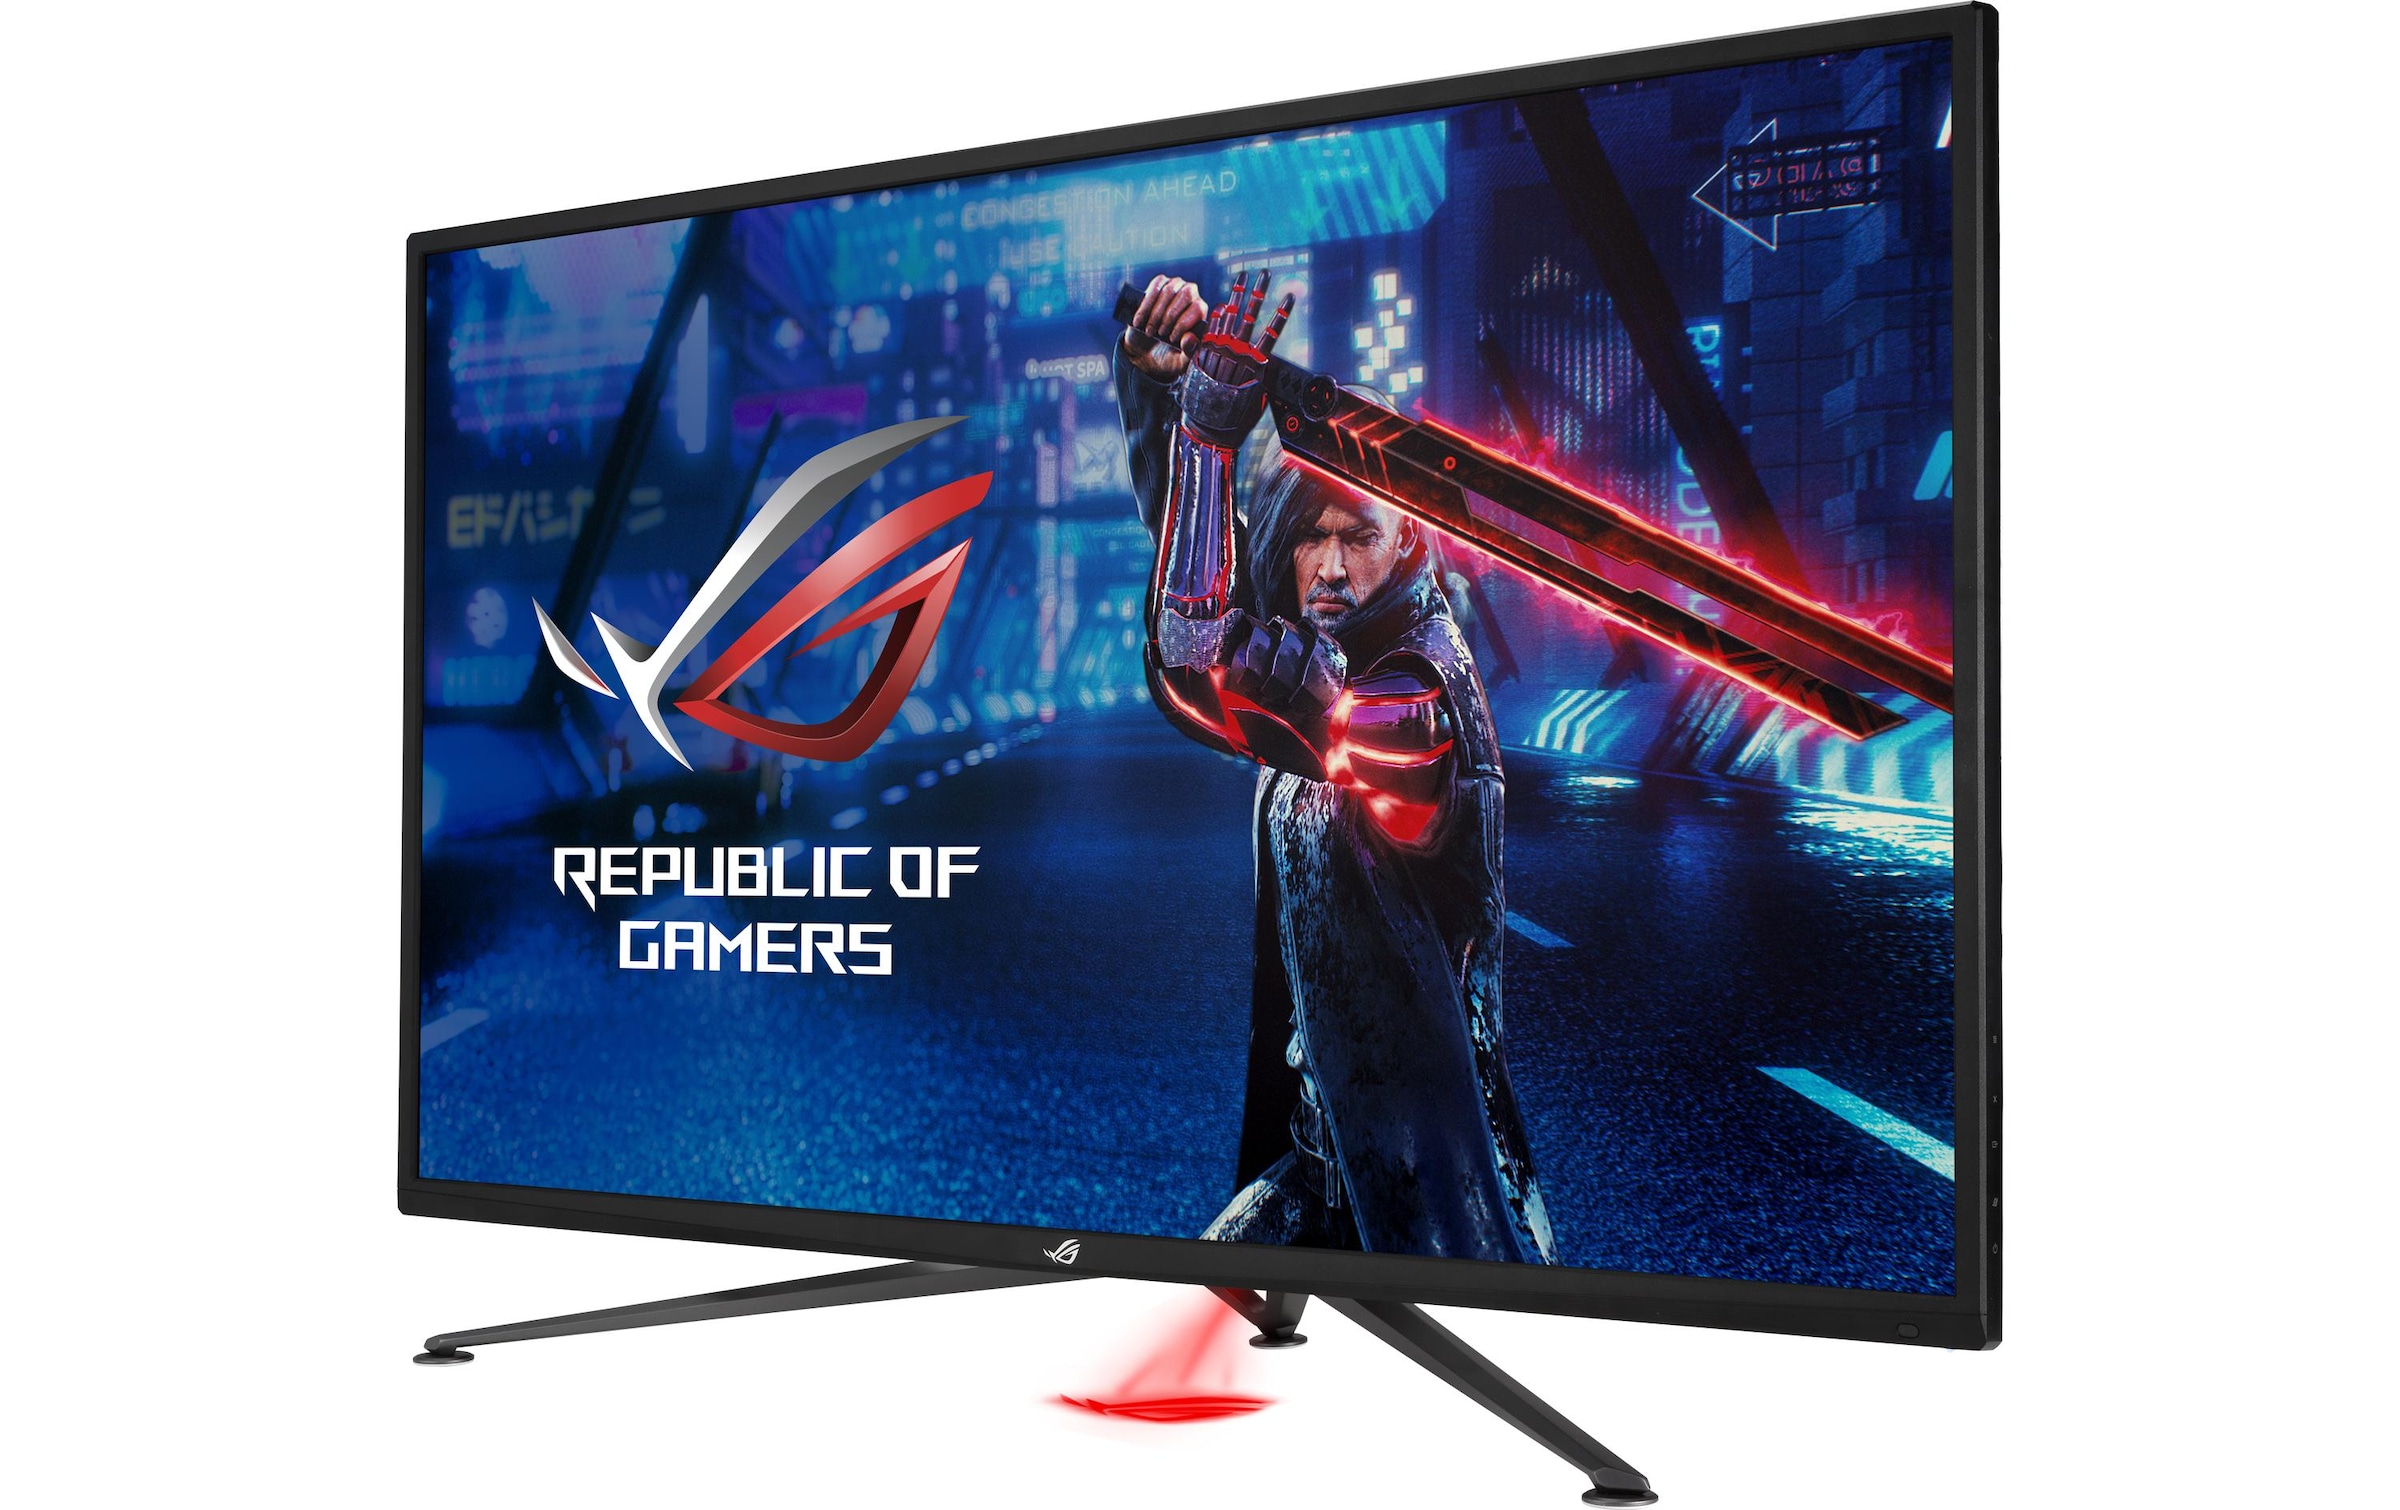 Asus Gaming-Monitor, 108,79 cm/43 Zoll, 3840 x 2160 px, 4K Ultra HD, 1 ms Reaktionszeit, 144 Hz